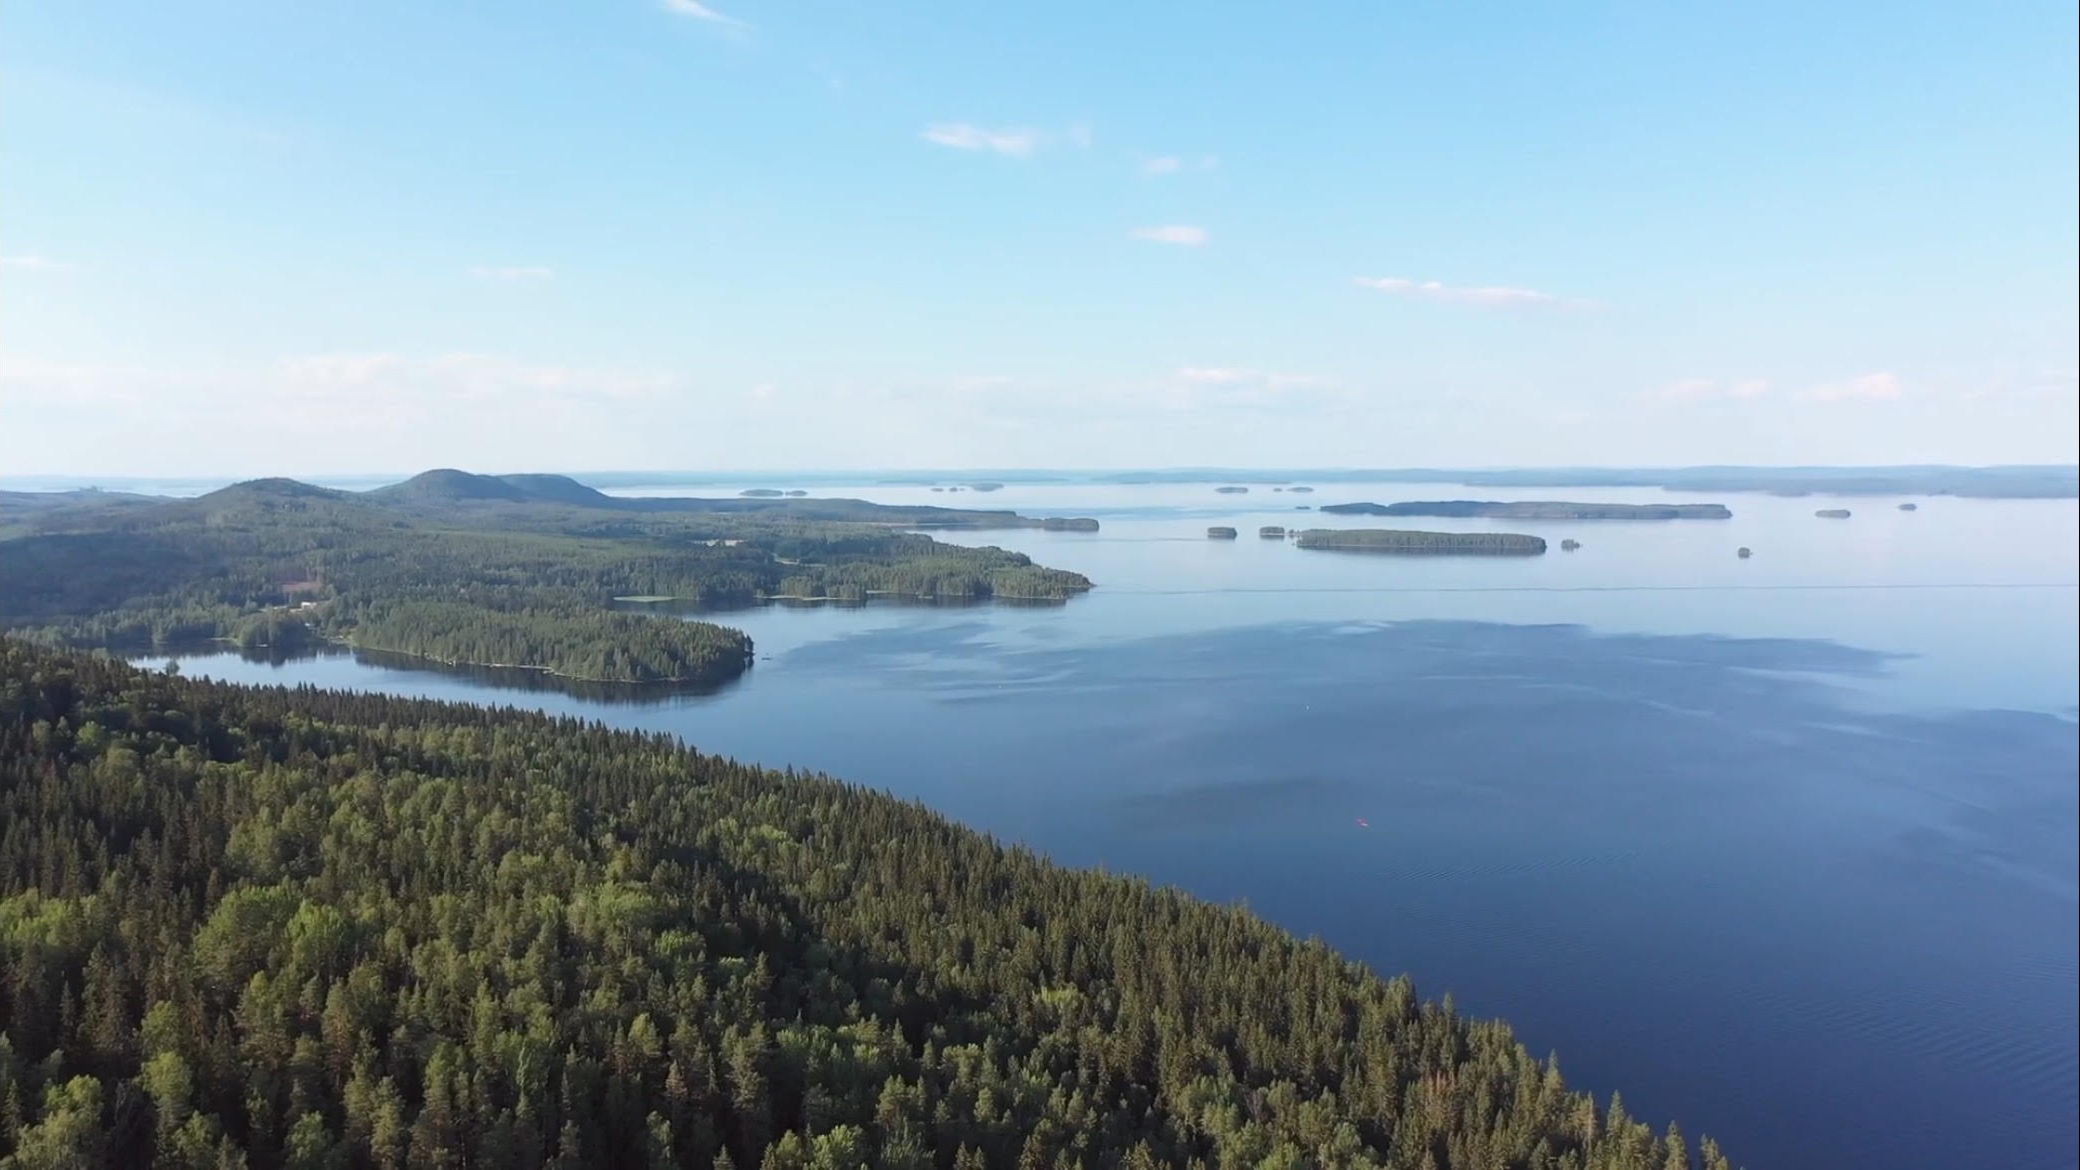 The documentary "The Happiest Country in the World: Finland" explores the reasons why.